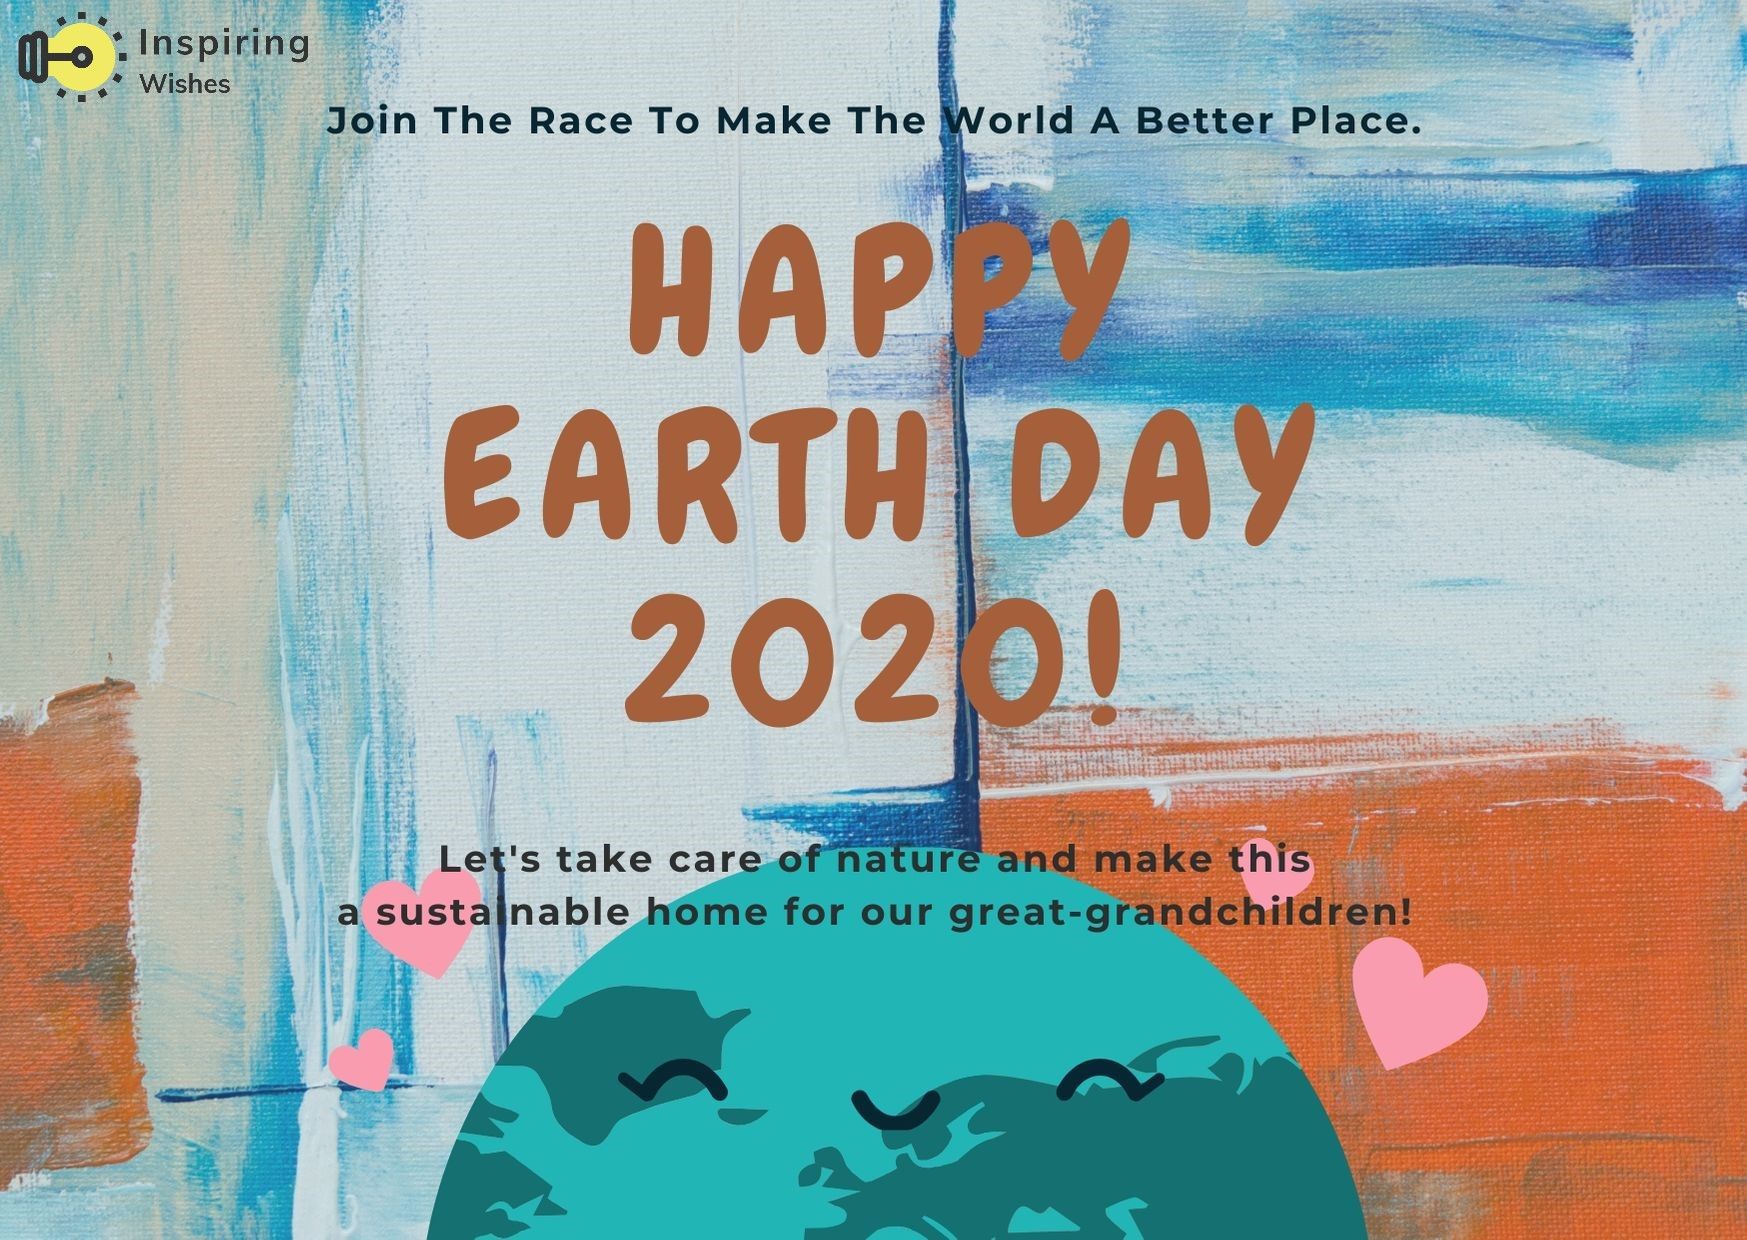 Happy Earth day 2020 Slogans, Quotes & Image. World Earth Day